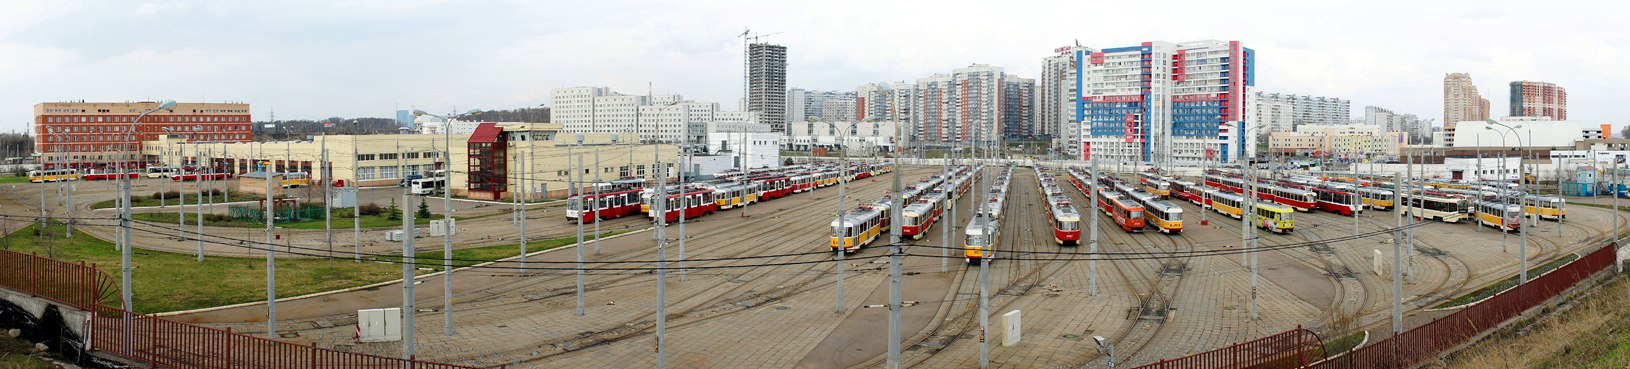 Moscow — Tram depots: [3] Krasnopresnenskoye. New site in Strogino; Moscow — Views from a height